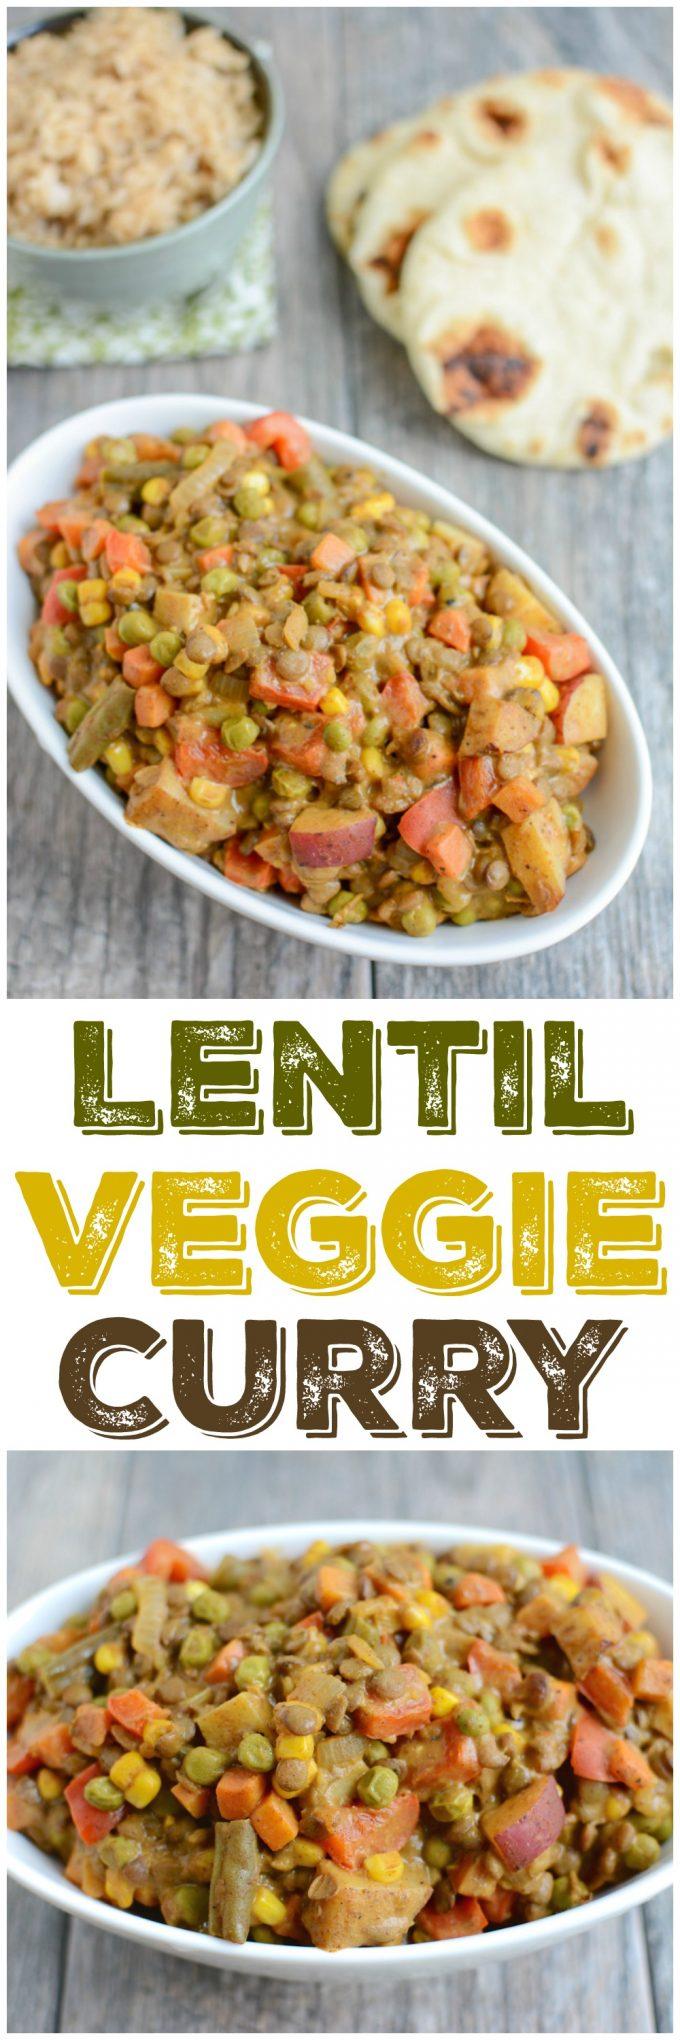 This Lentil Vegetable Curry is an easy vegetarian recipe that's perfect for a busy weeknight. Or make it ahead of time and reheat for a quick lunch or dinner!